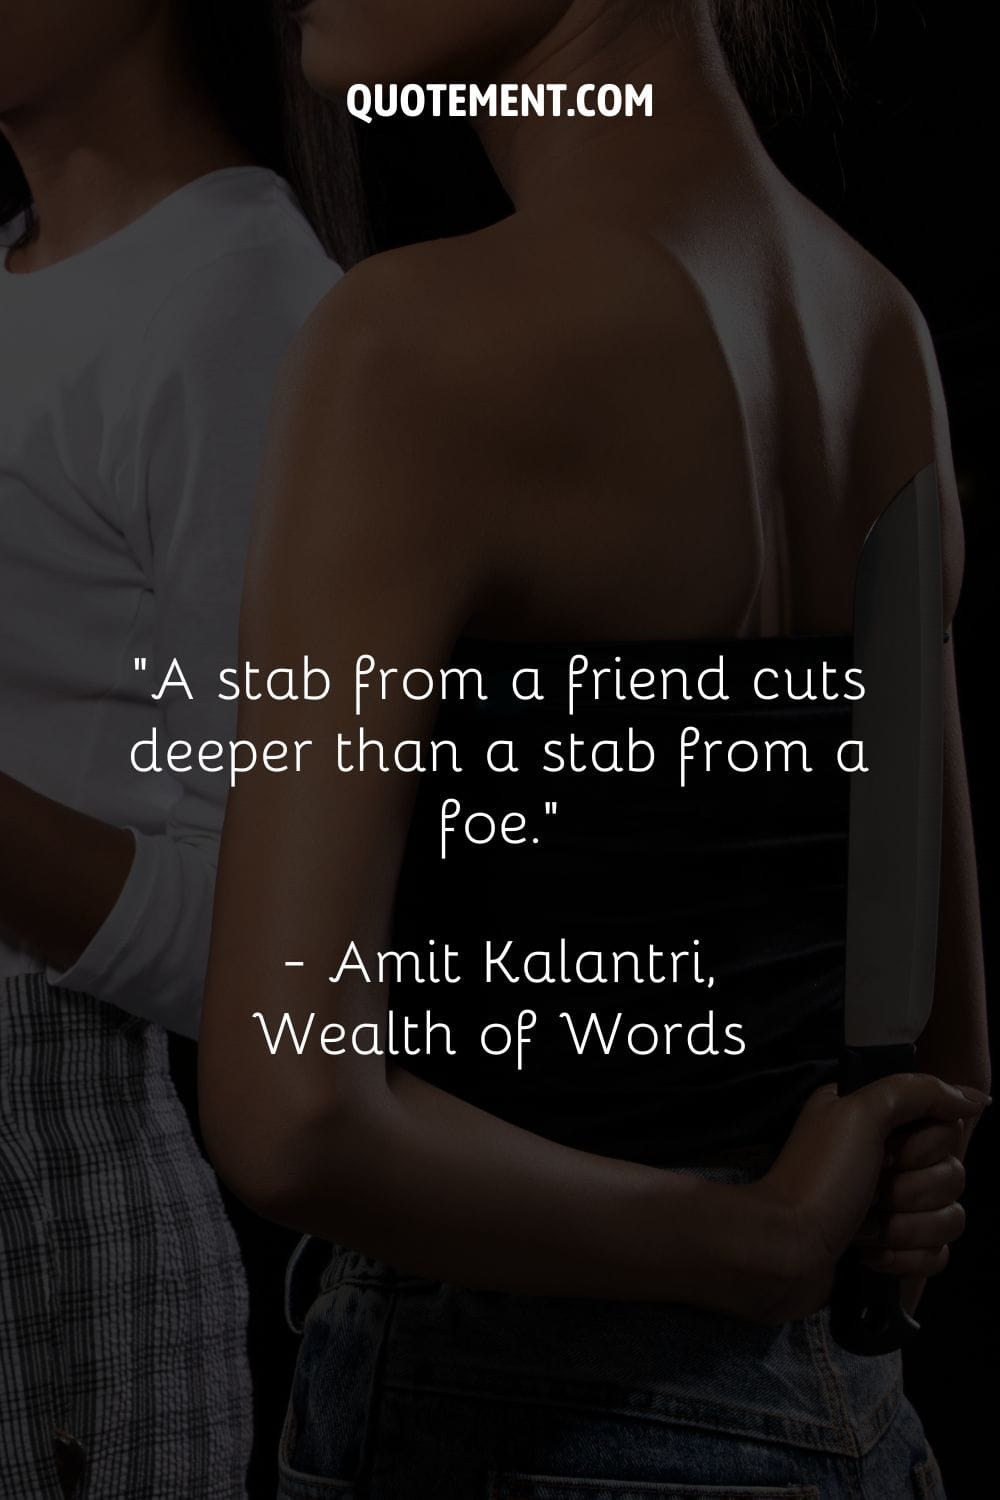 A stab from a friend cuts deeper than a stab from a foe